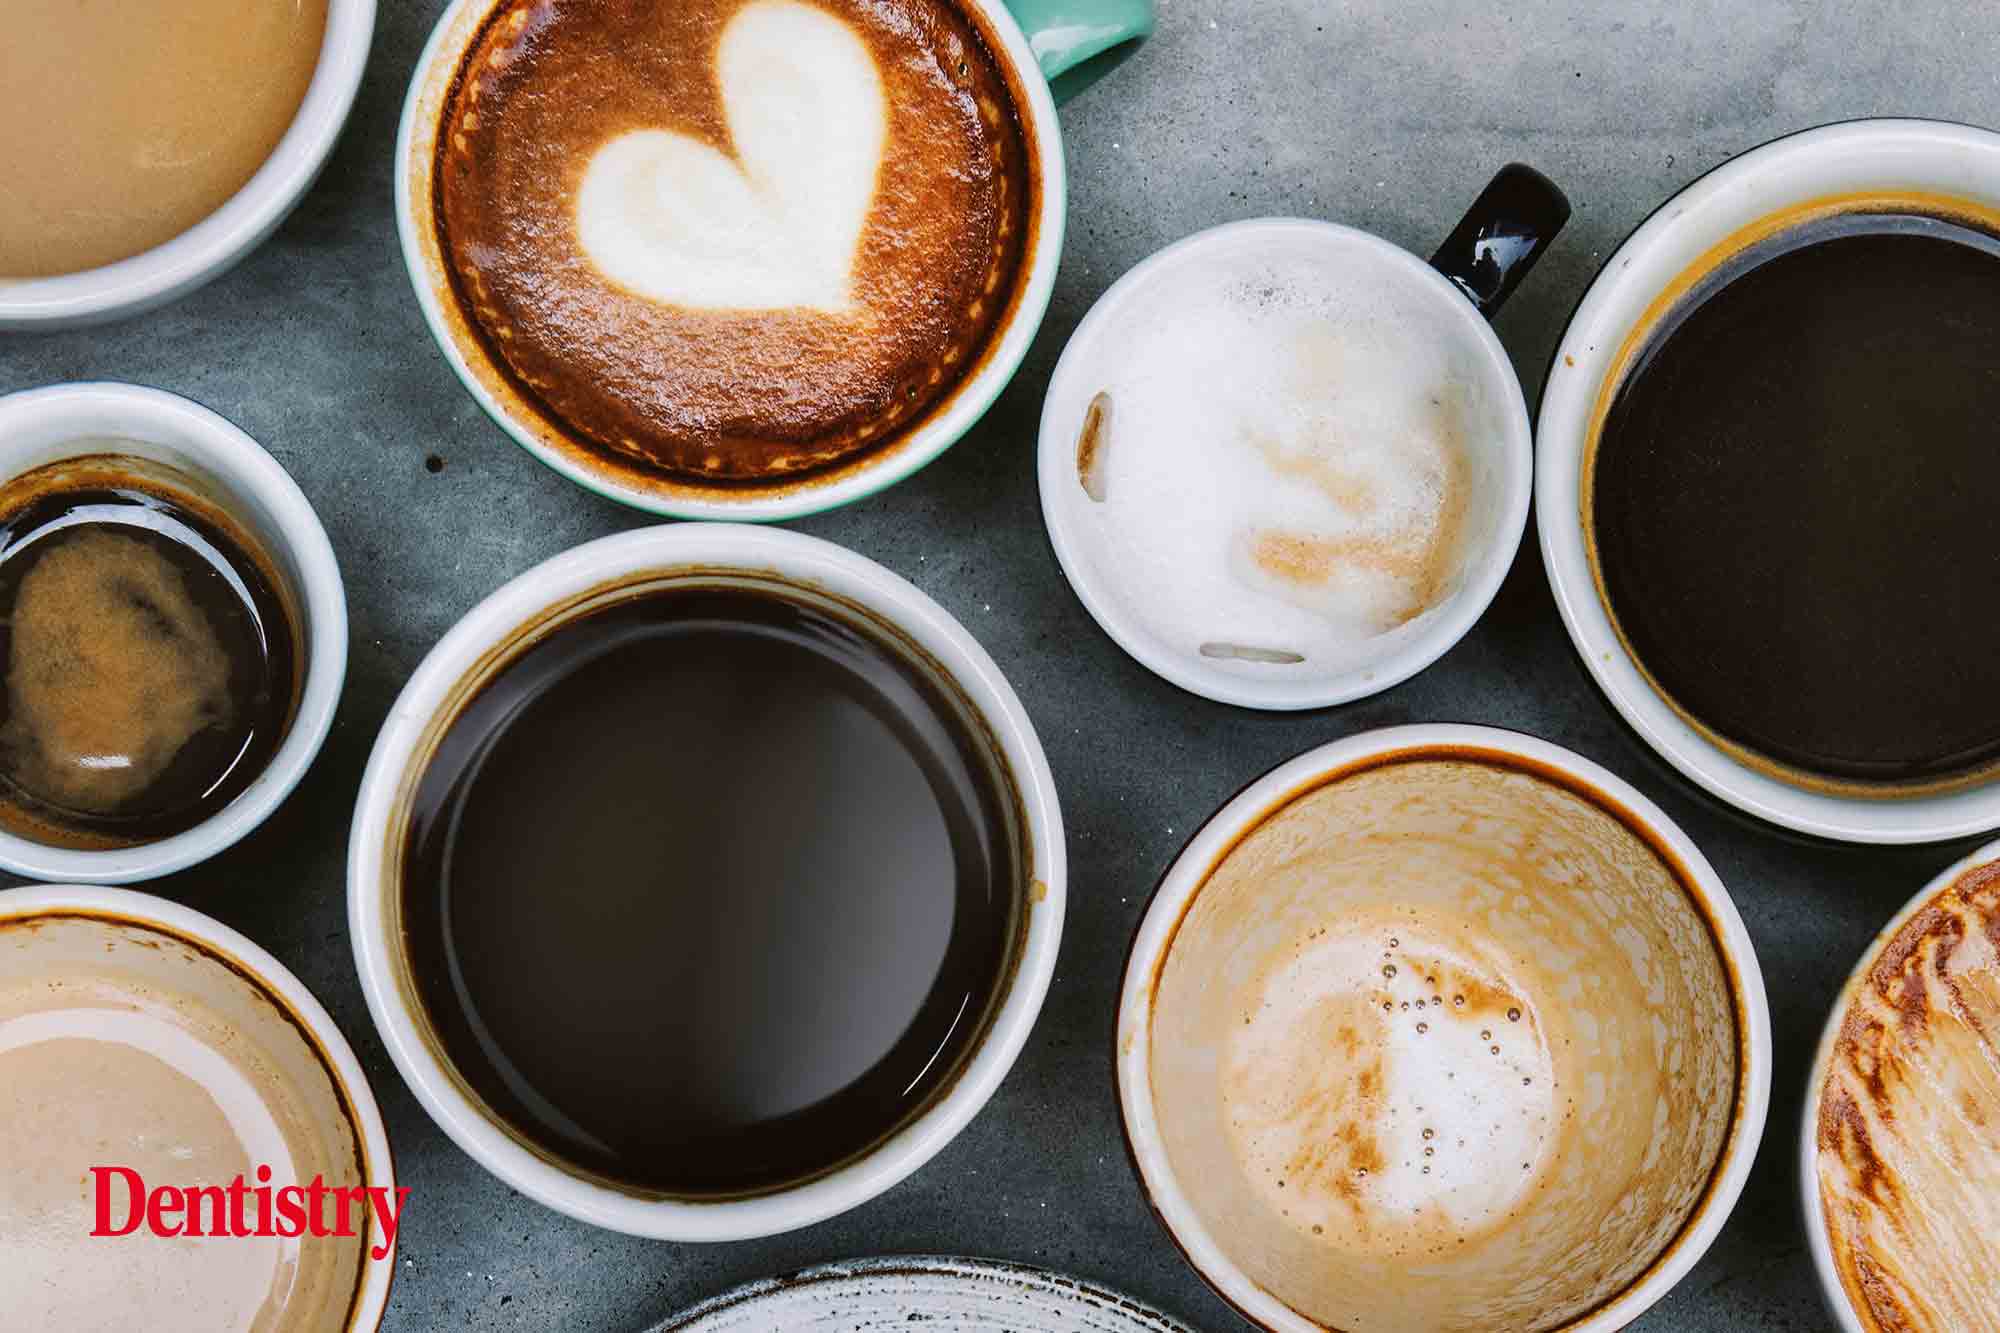 A new study has linked high blood caffeine levels with a reduced risk in health issues, including obesity and type 2 diabetes.